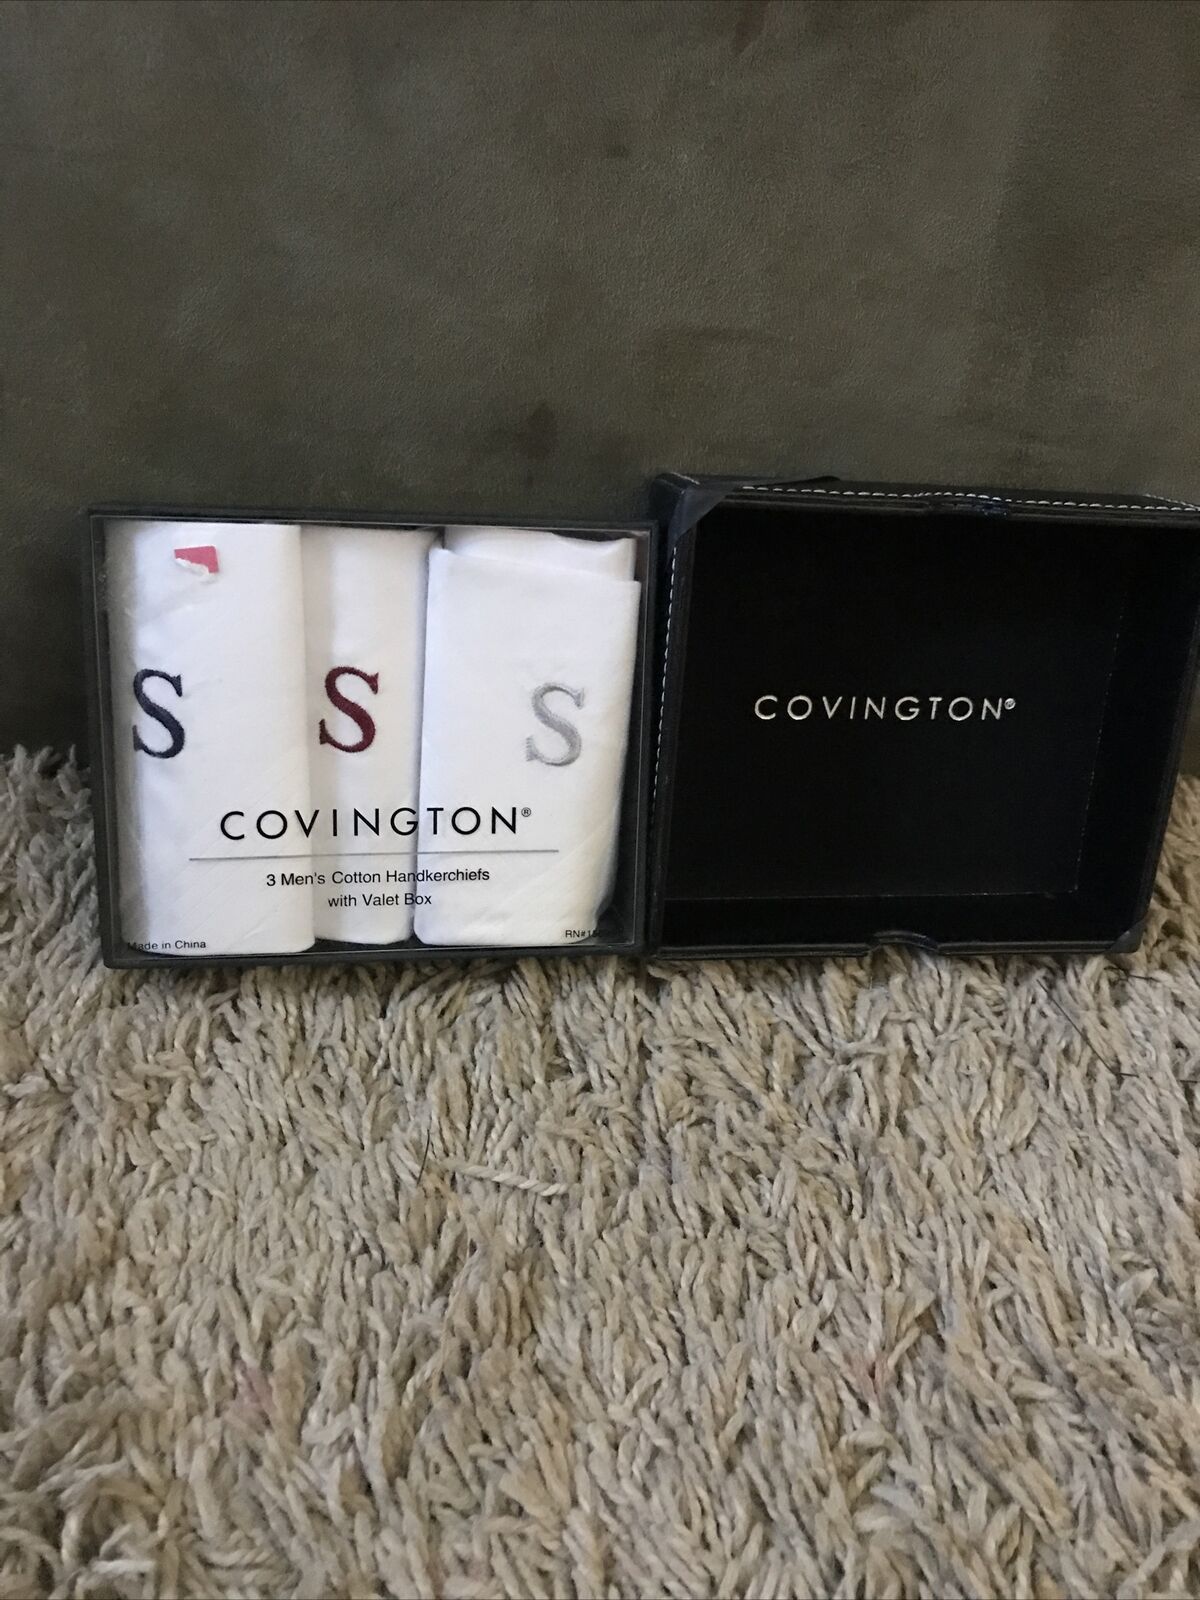 Brand Don't miss the campaign New Recommended Covington 3 Pc Set Shipping Lett Free Handkerchief